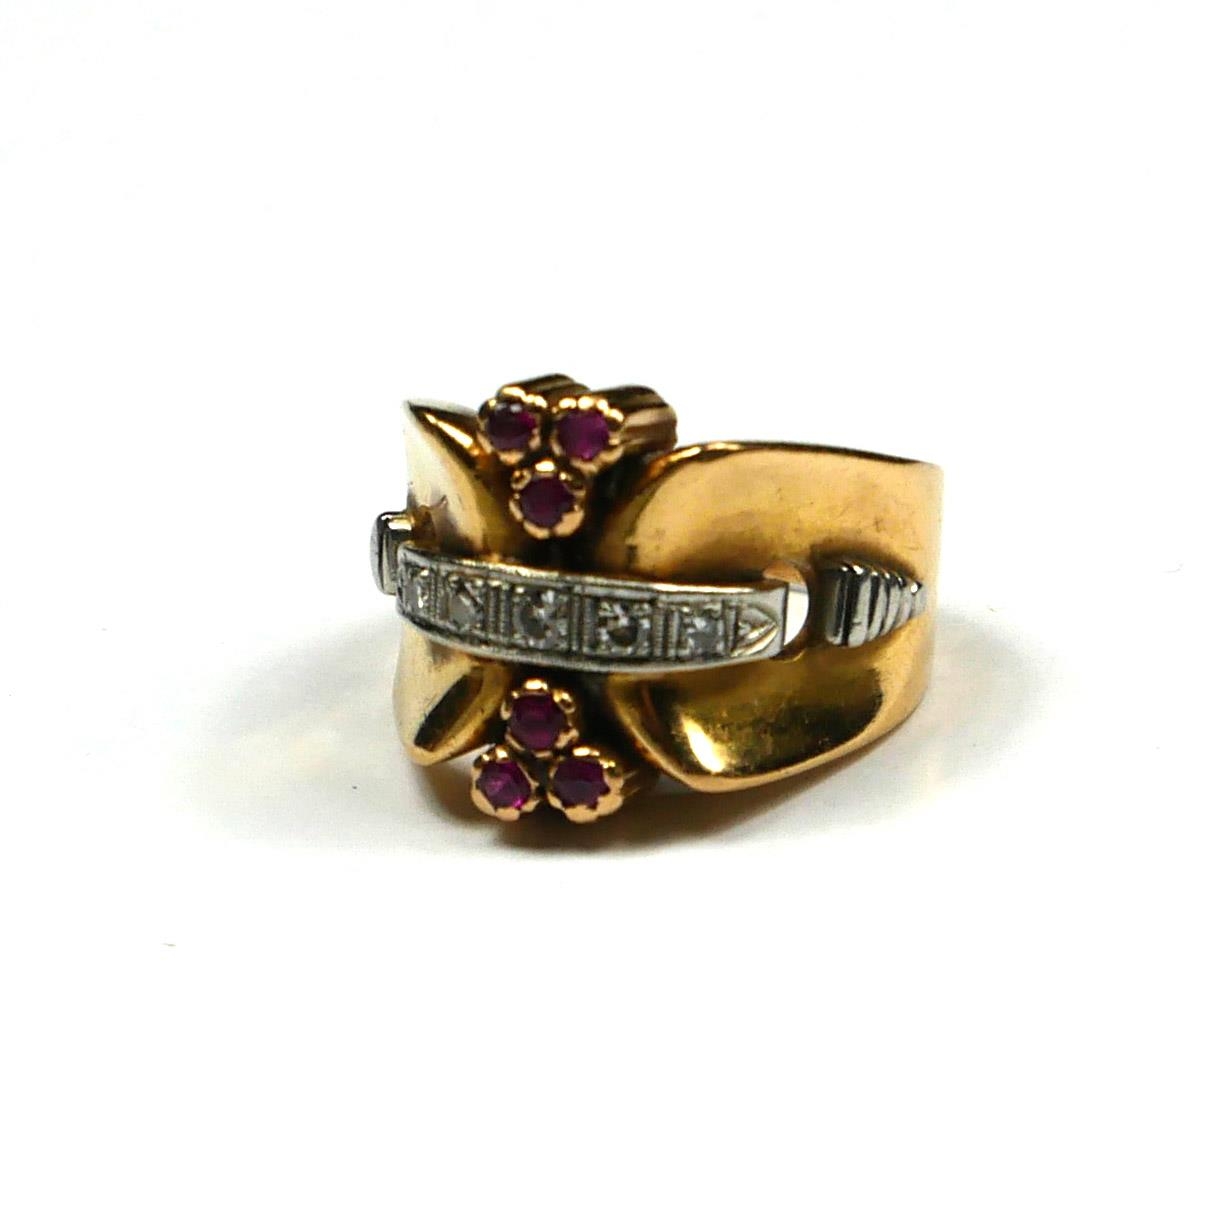 A VINTAGE 14CT GOLD, RUBY AND DIAMOND COCKTAIL RING The single row of round cut diamonds with two